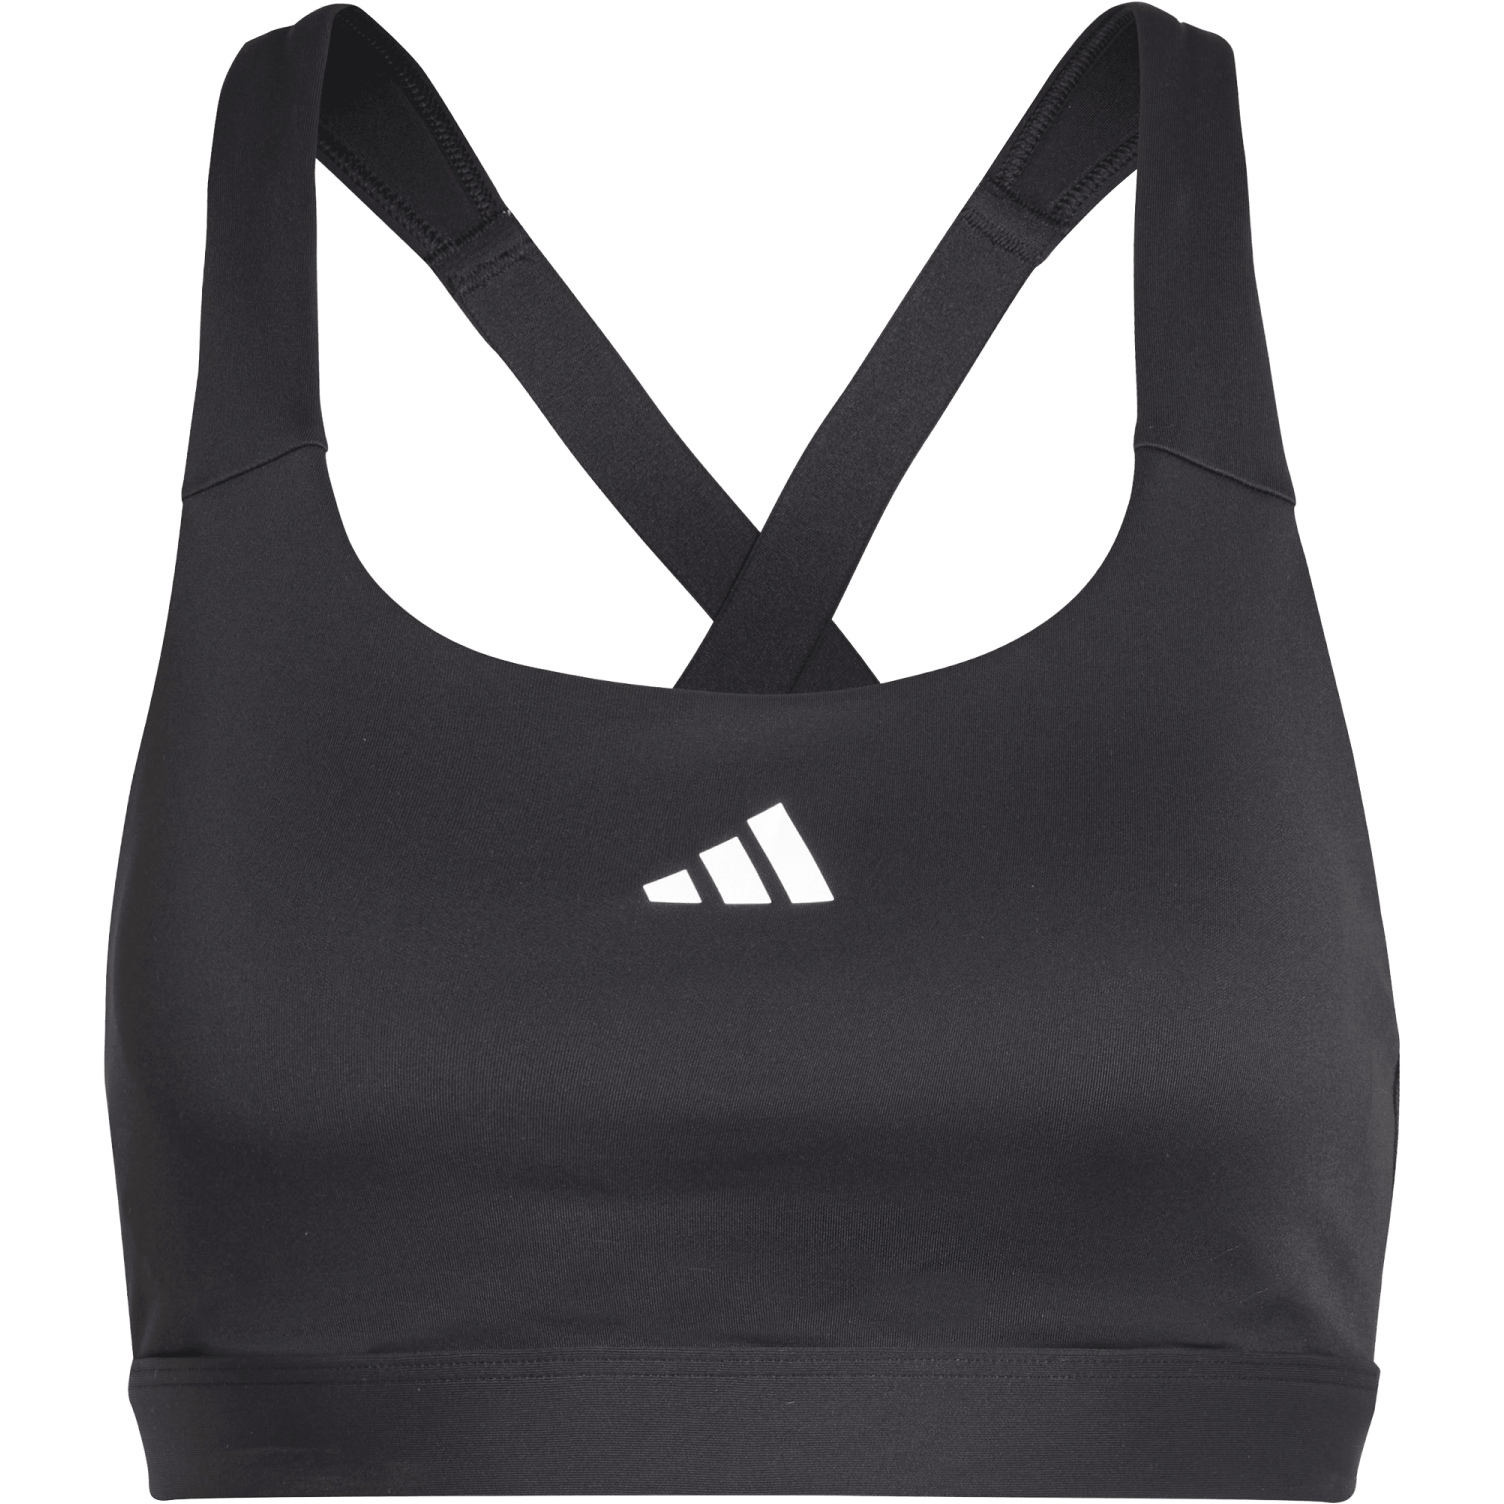 Image of adidas TLRDREACT Training High-Support Sports Bra Women - Cup size A-B - black IQ3382